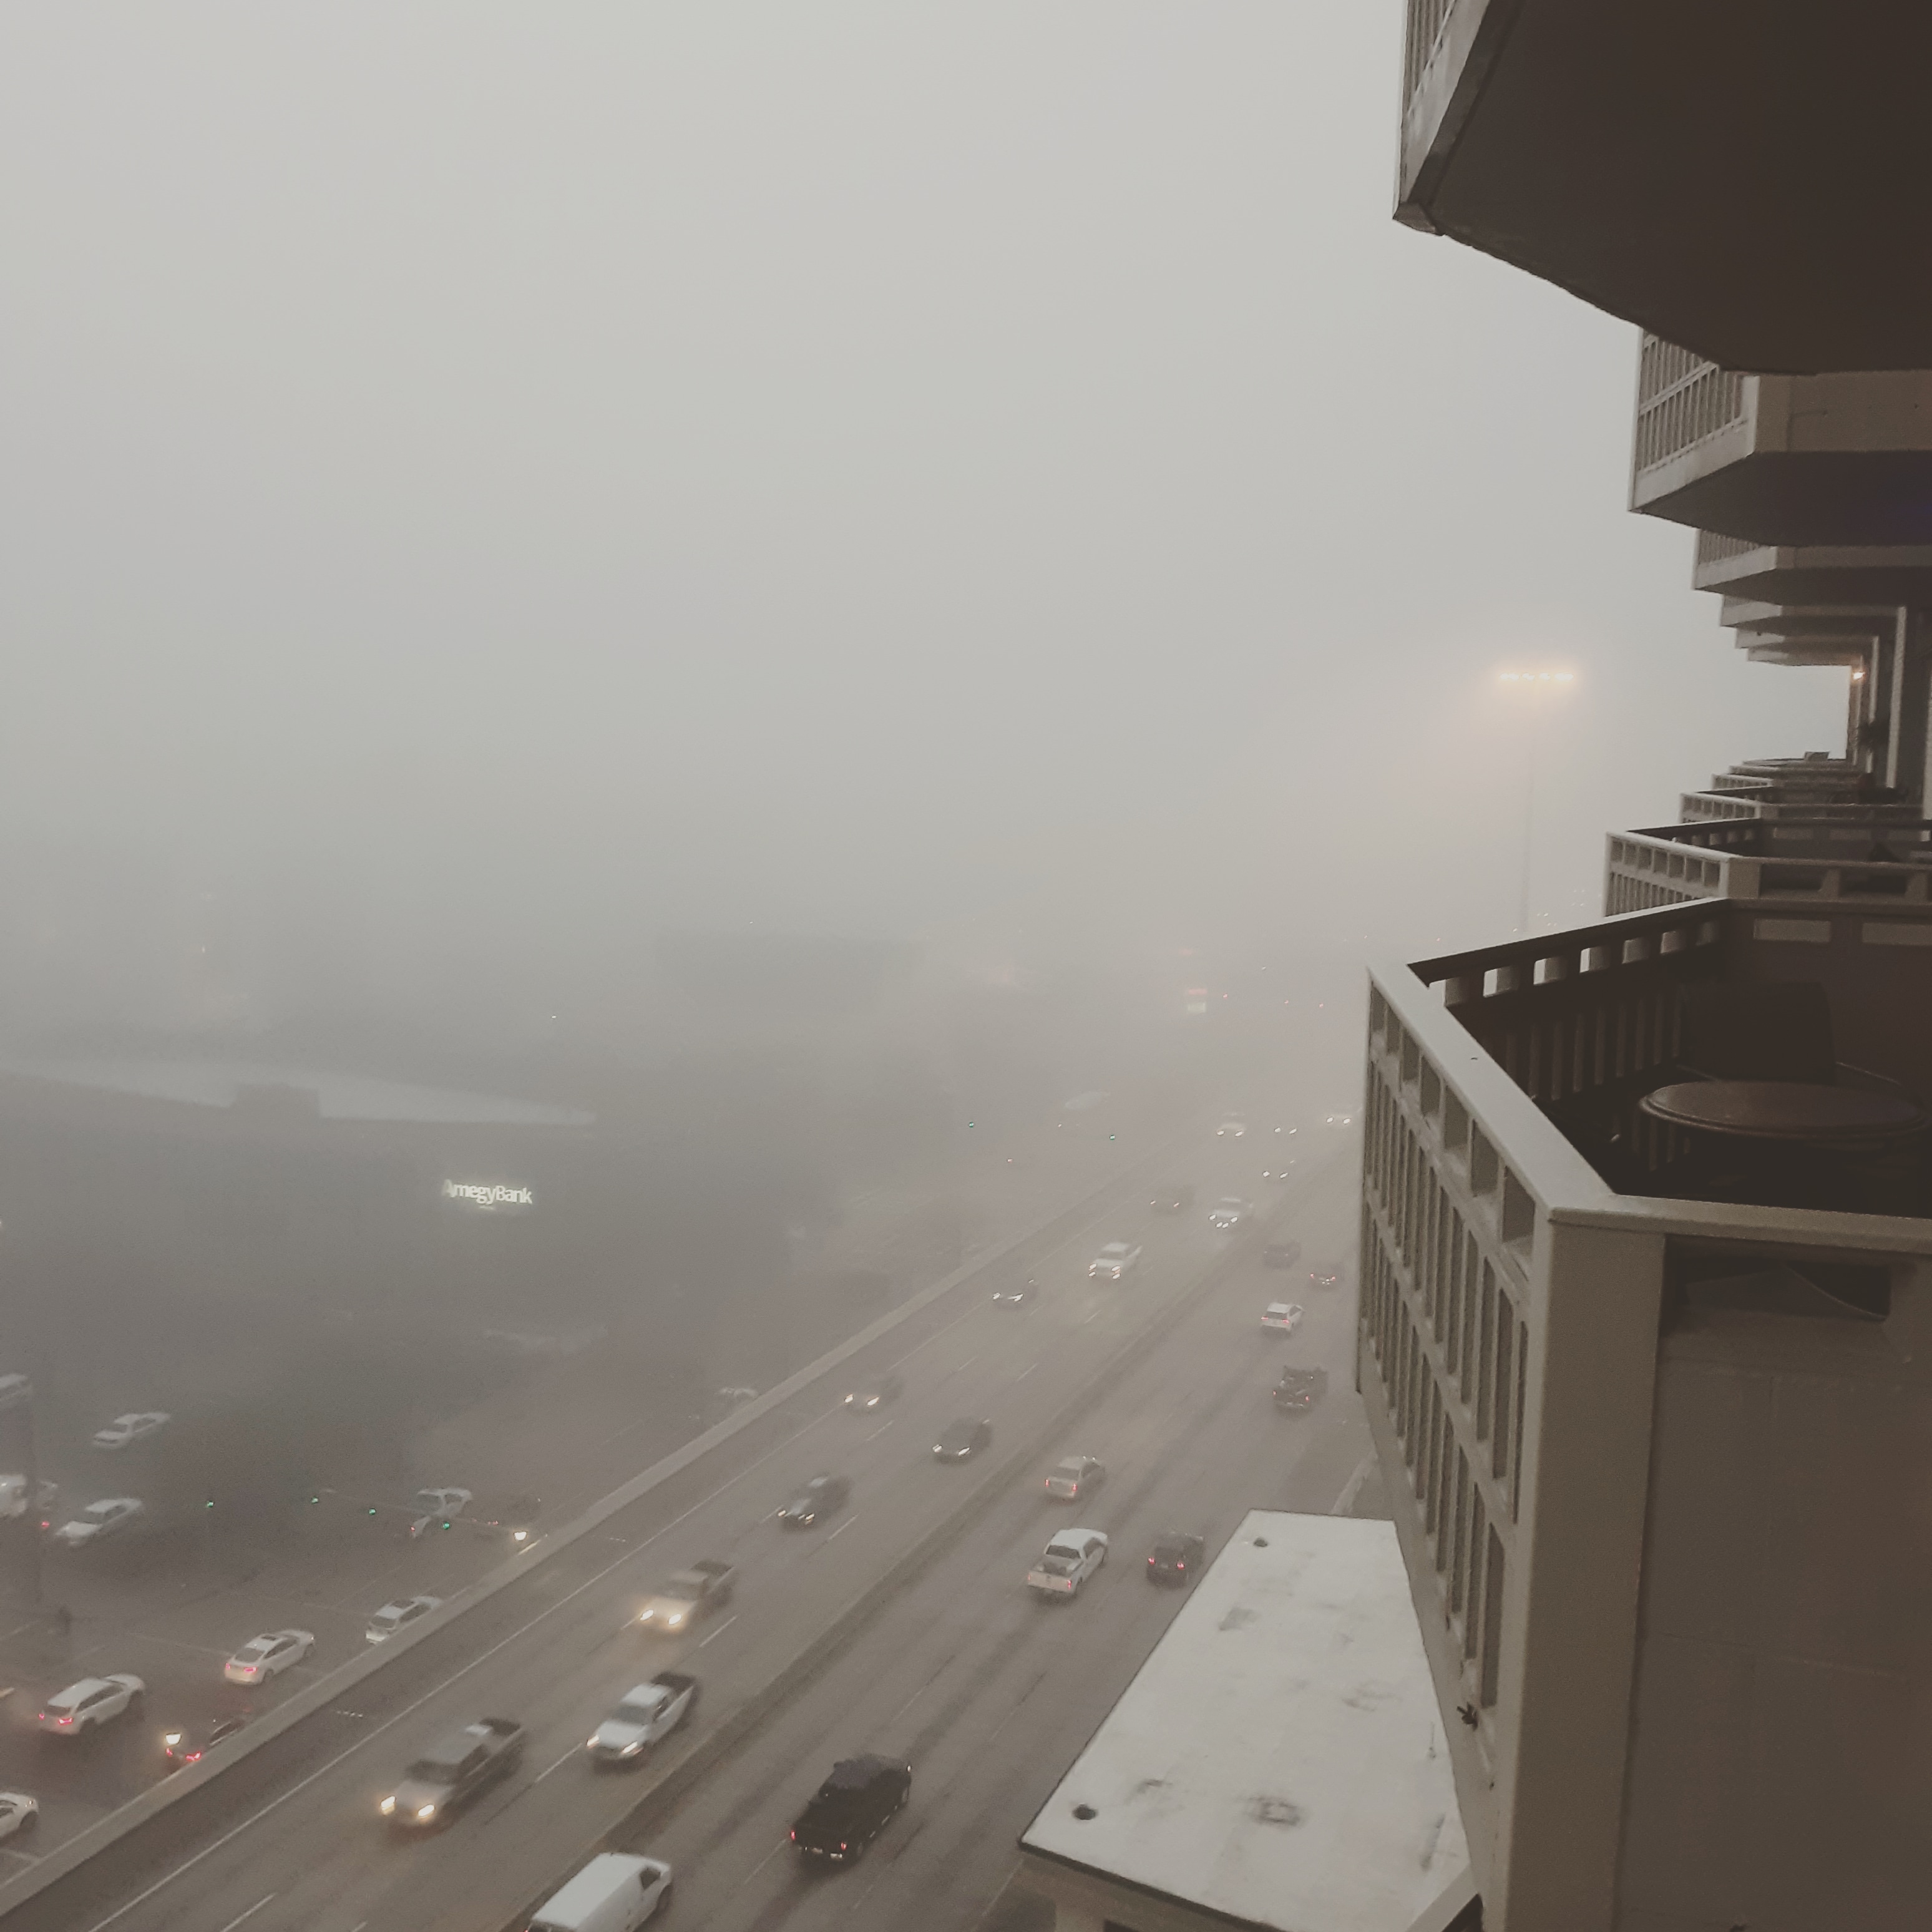 A photo of  Houston, Texas, shot from an apartment buildiing's balcony with consderable fog. Down and to the left, extending to the center, is a road with cars.